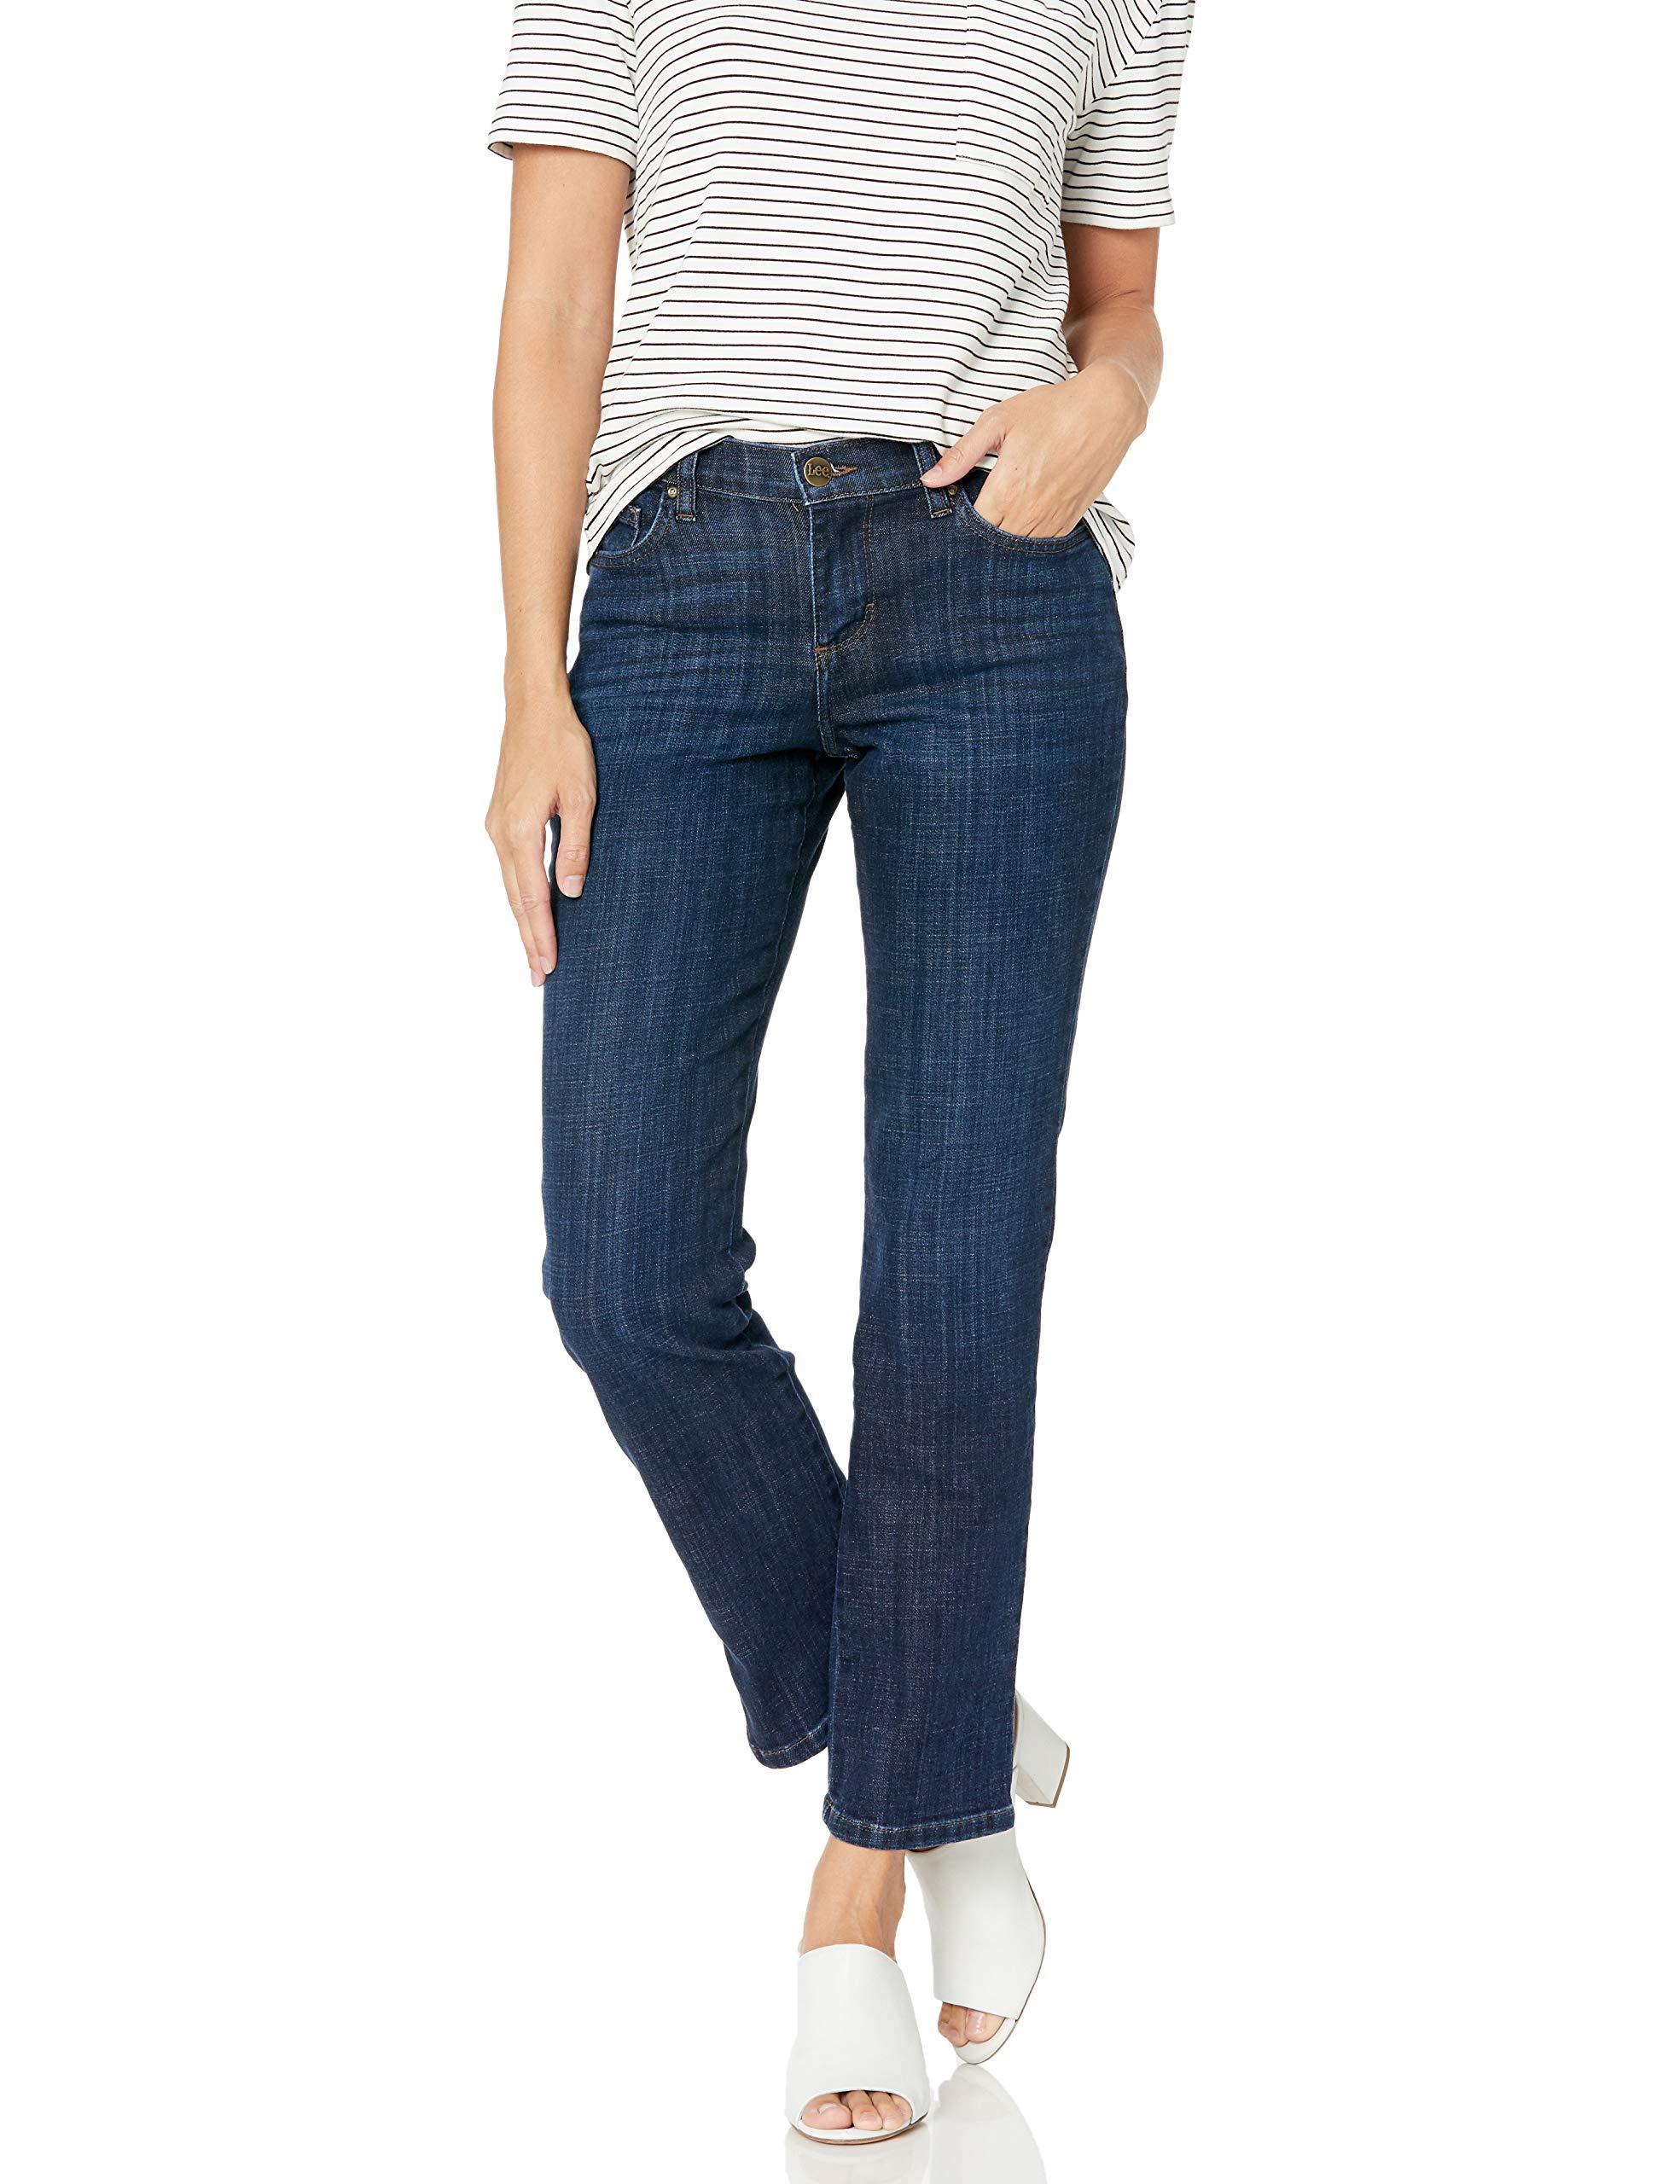 Lee Jeans Denim Relaxed Fit Straight Leg Jean in Blue - Save 41% - Lyst